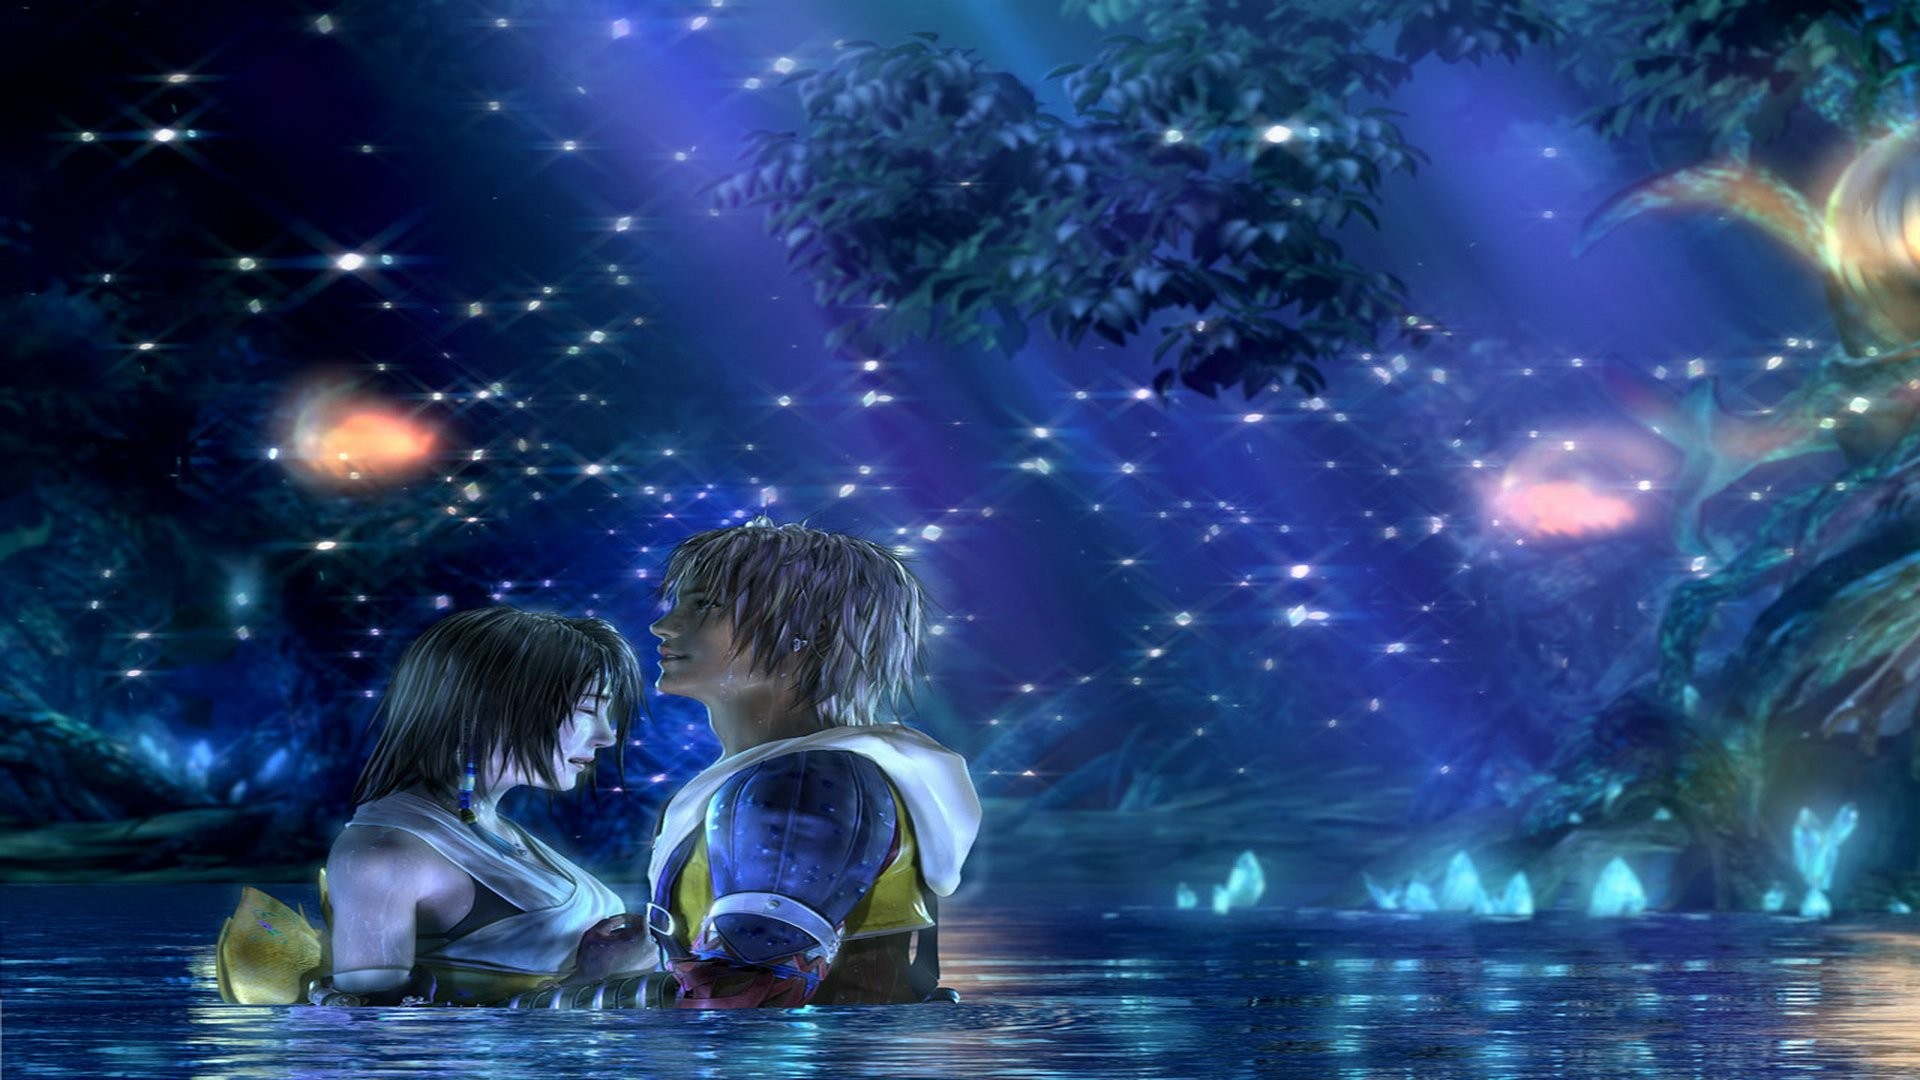 Final Fantasy X Wallpapers Hd 77 Images